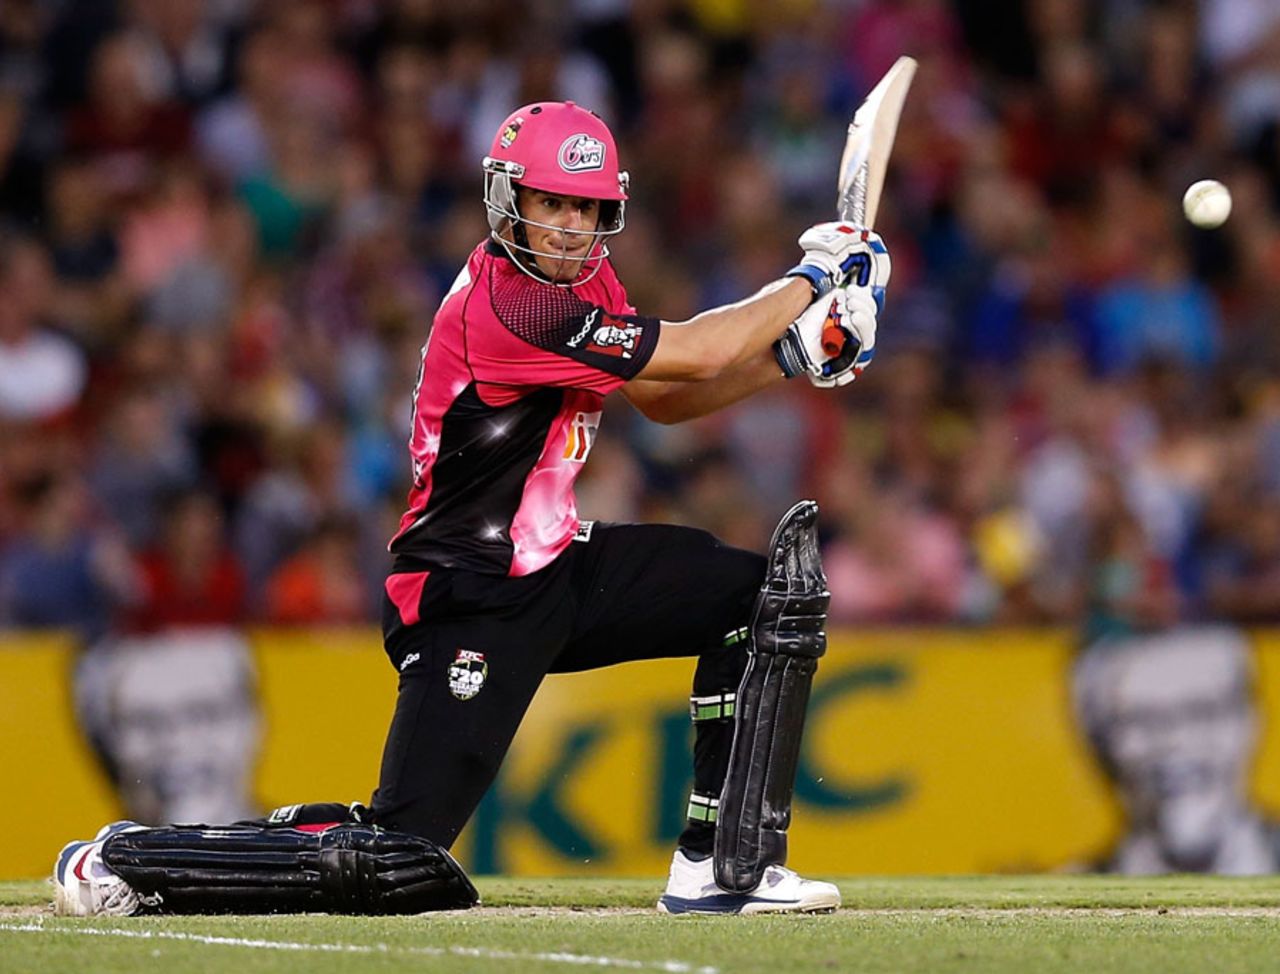 Moises Henriques muscles the ball through the off side during his 55, Renegades v Sixers, Big Bash League 2013-14, Melbourne, January 18, 2014